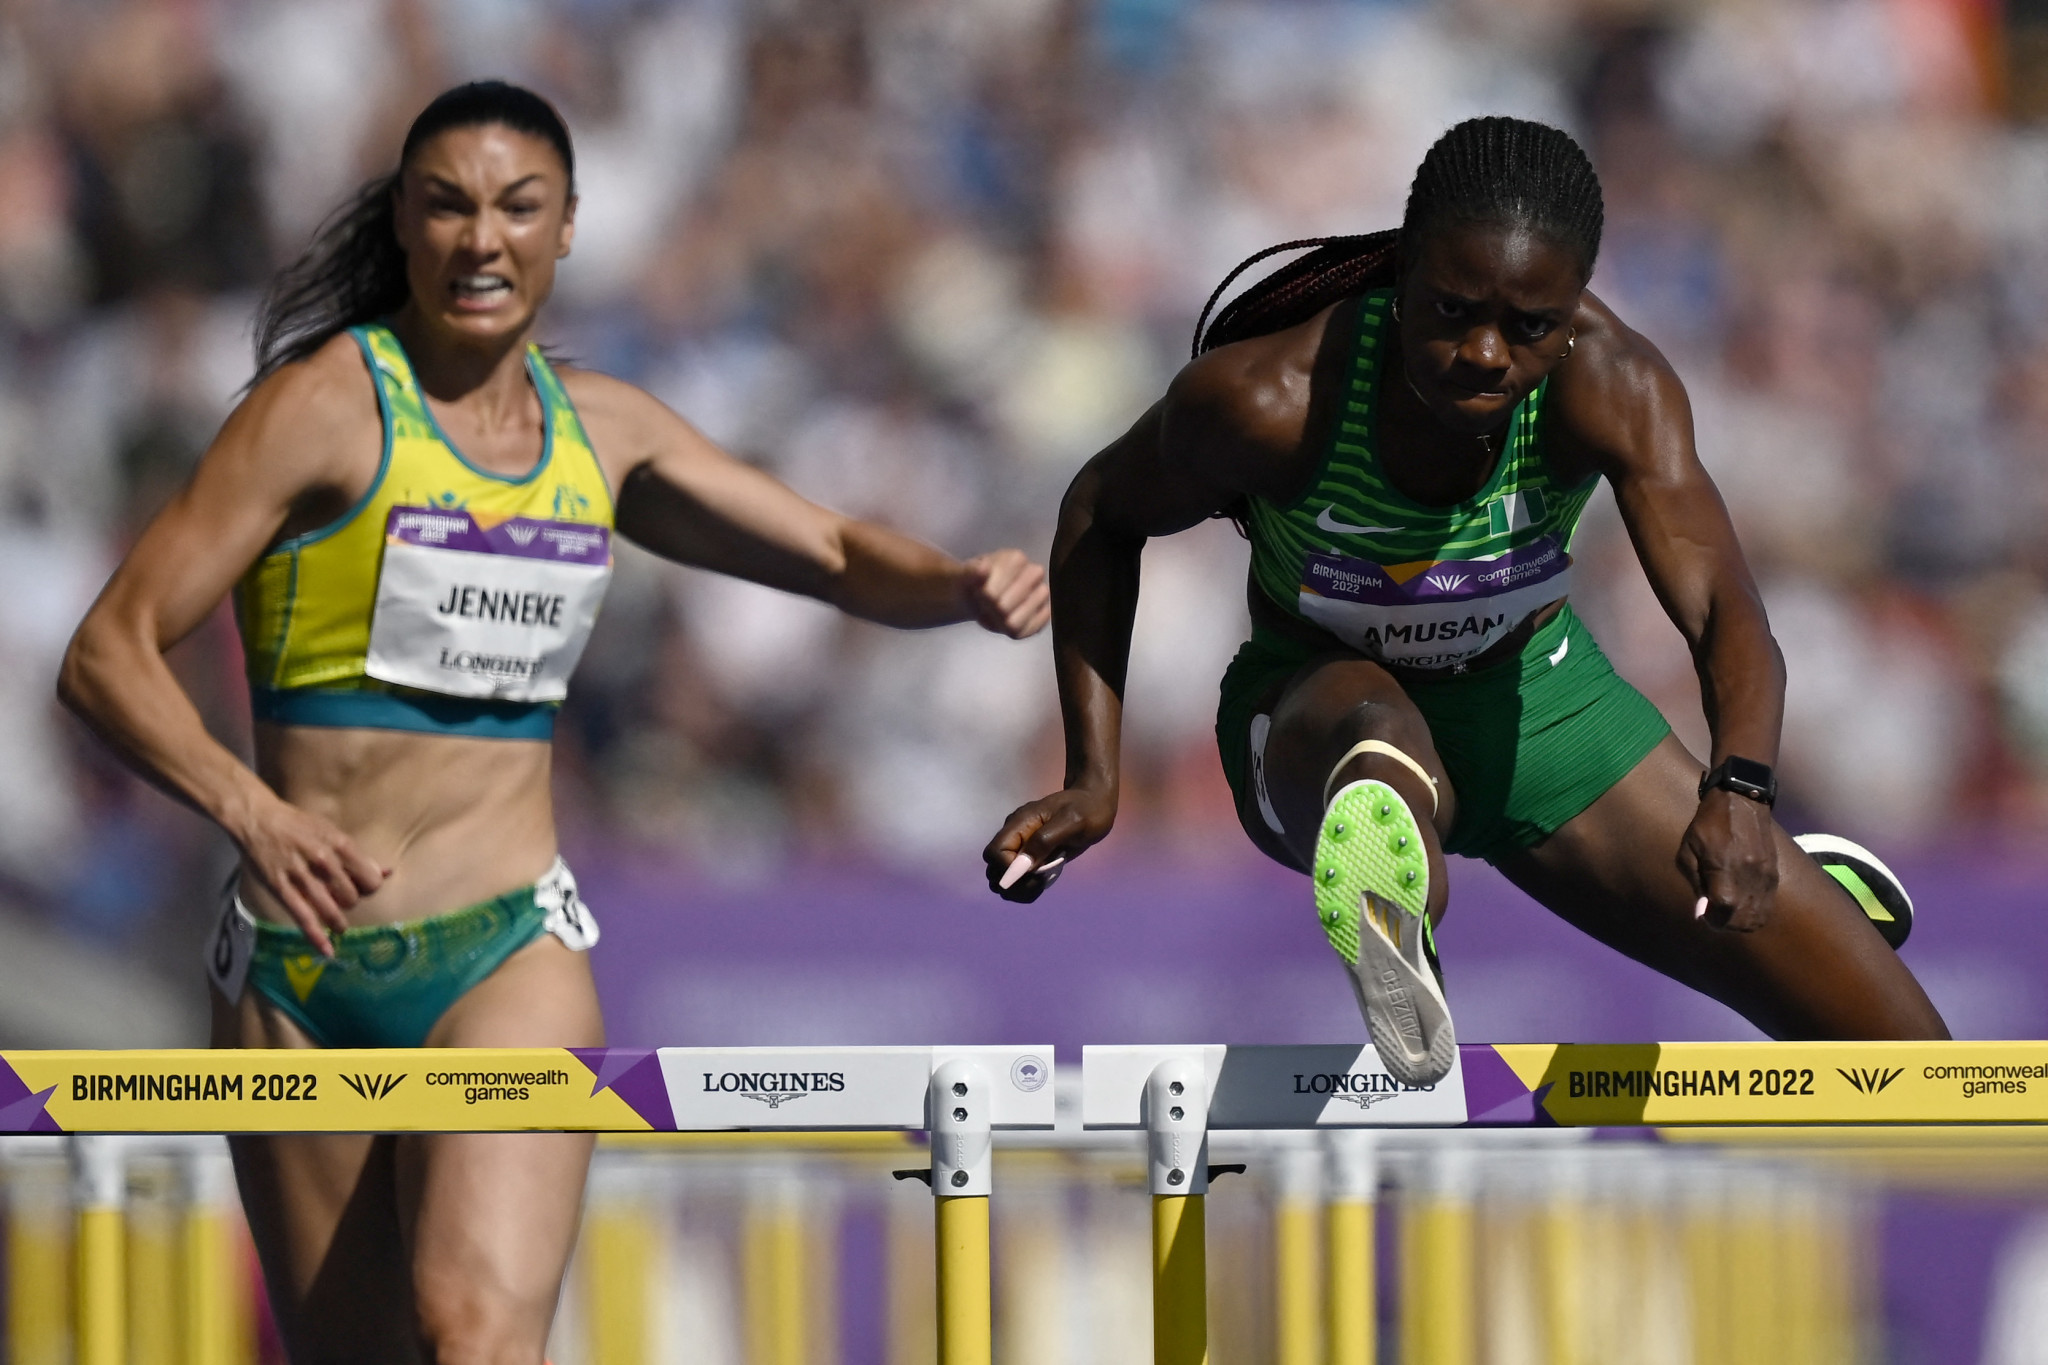 Tobi Amusan set a new Games record of 12.30 seconds in the women's 100m hurdles before helping Nigeria win the women’s 4x100m title ©Getty Images